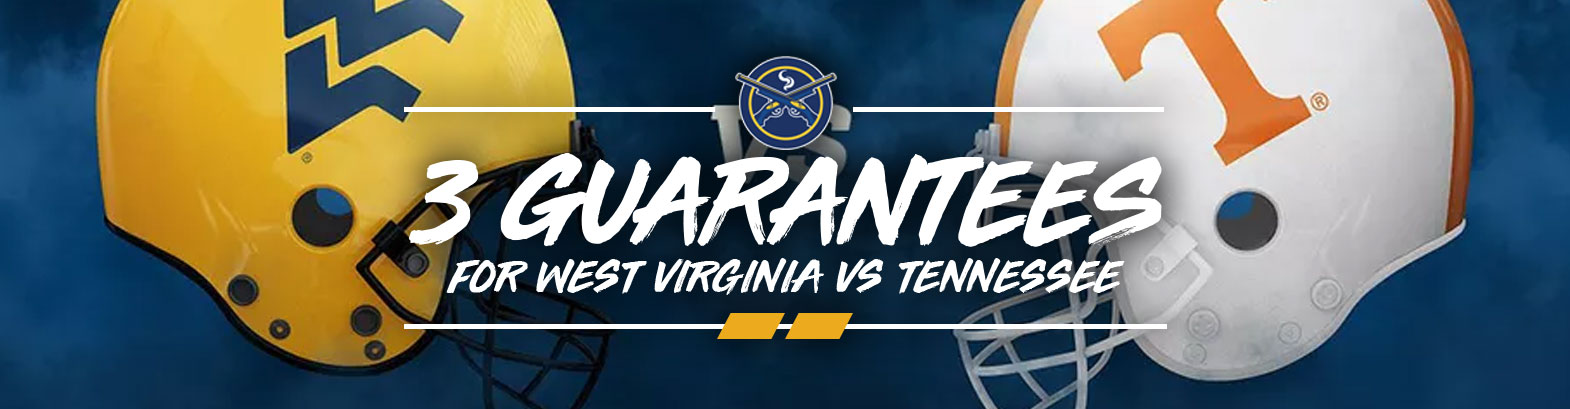 3 Guarantees for West Virginia vs. Tennessee